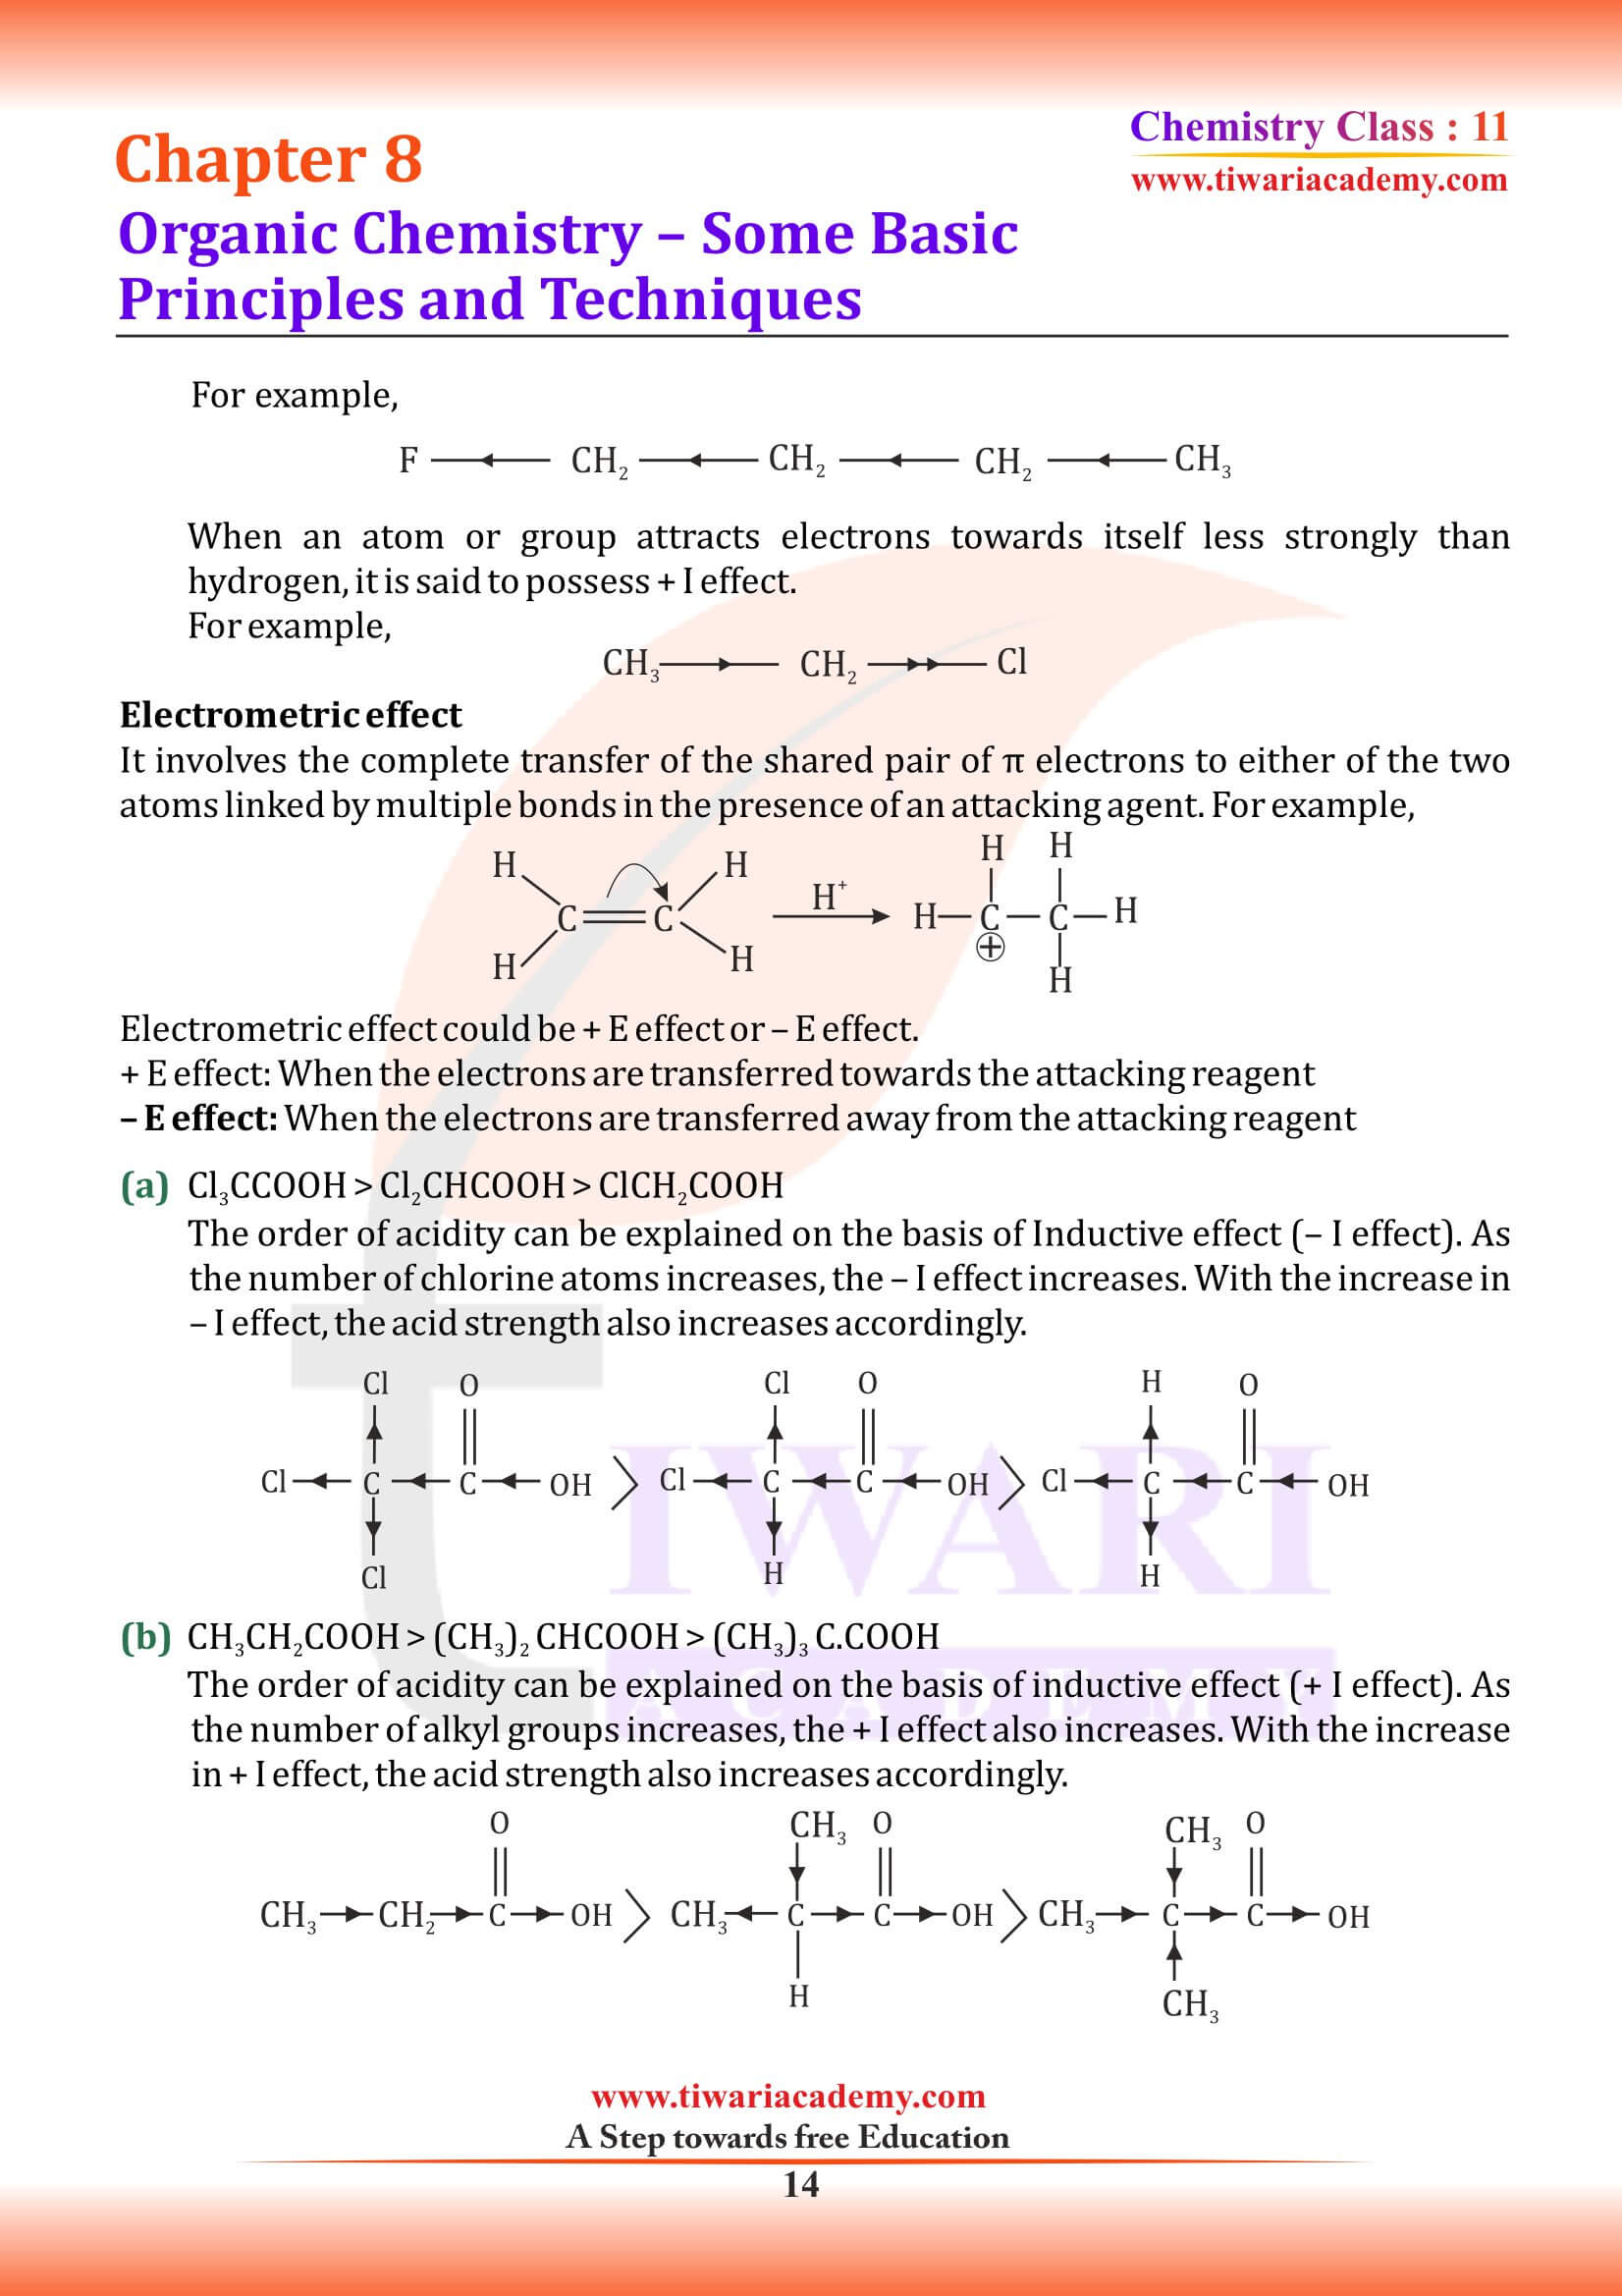 Class 11 Chemistry Chapter 8 NCERT Solutions